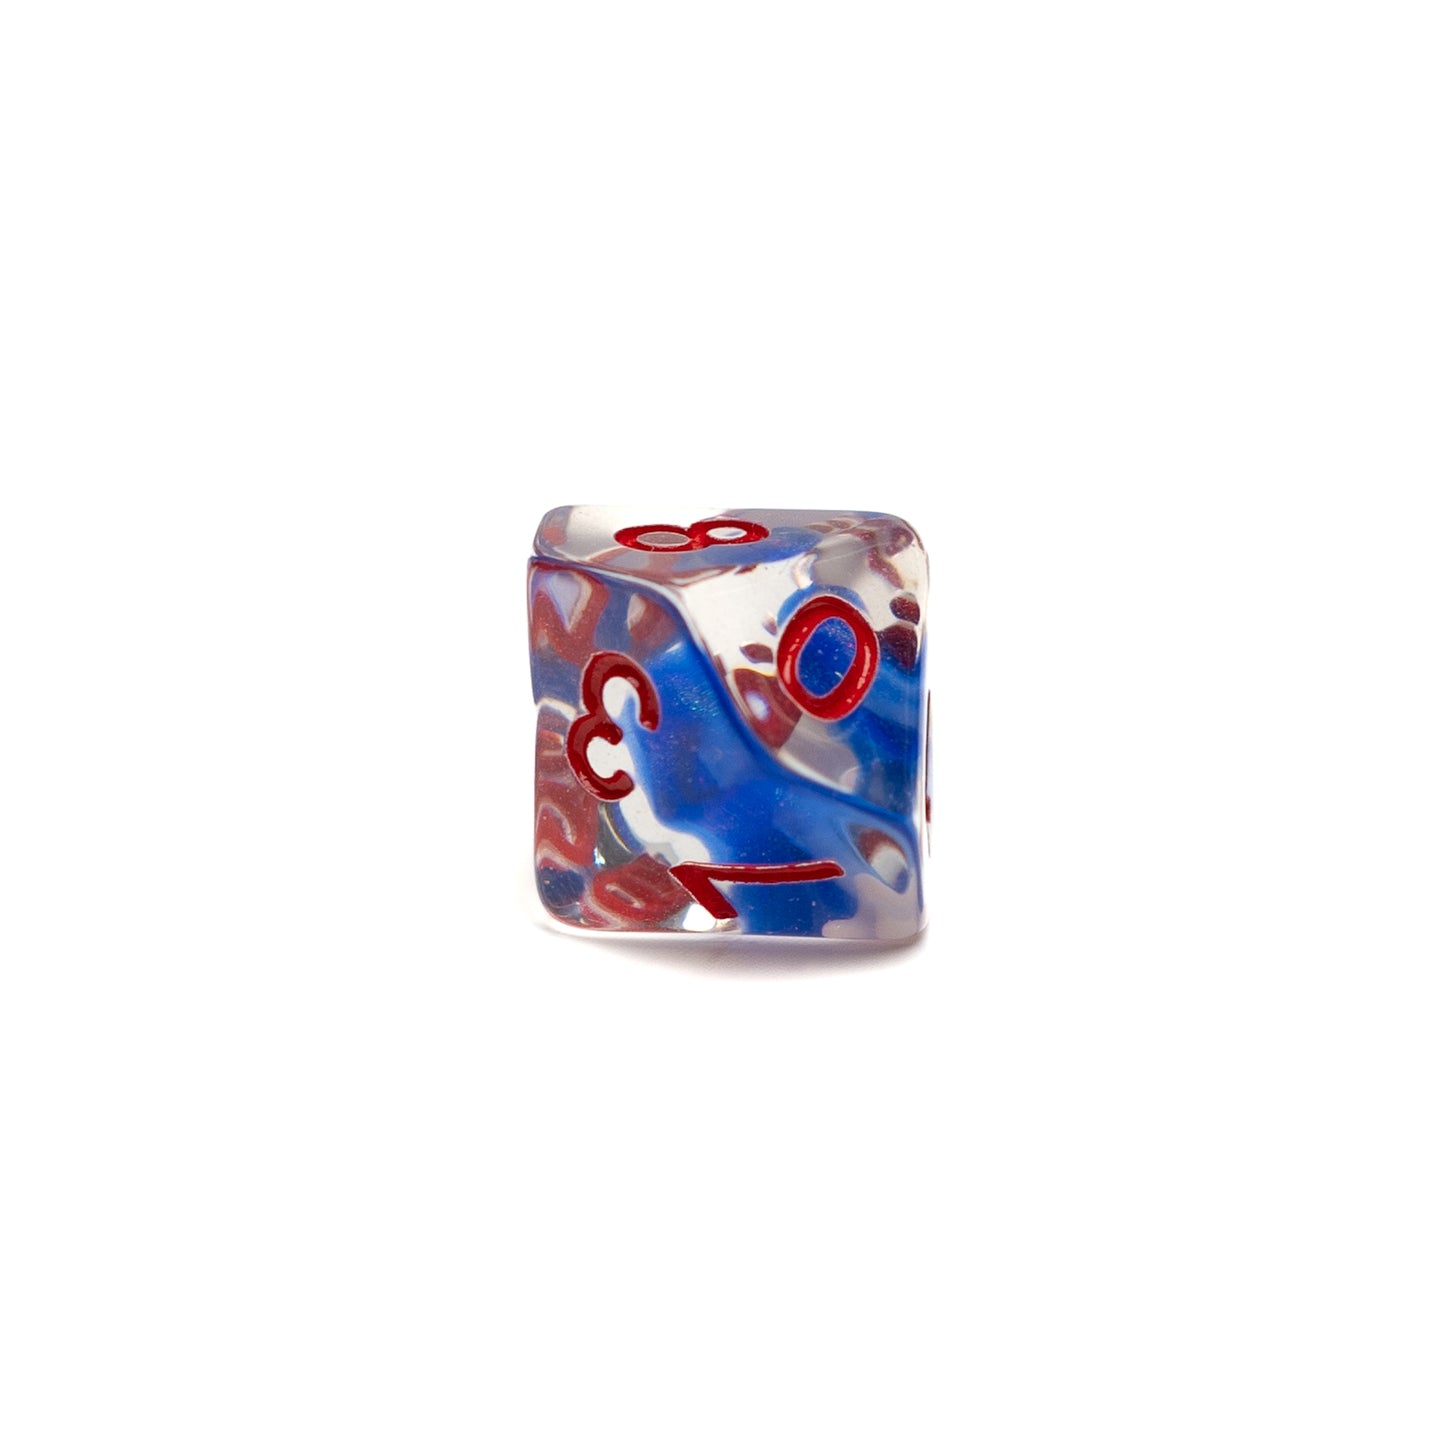 Roll Britannia Acrylic Dungeons and Dragons D10 Dice with Red and Blue Ocean Aesthetic